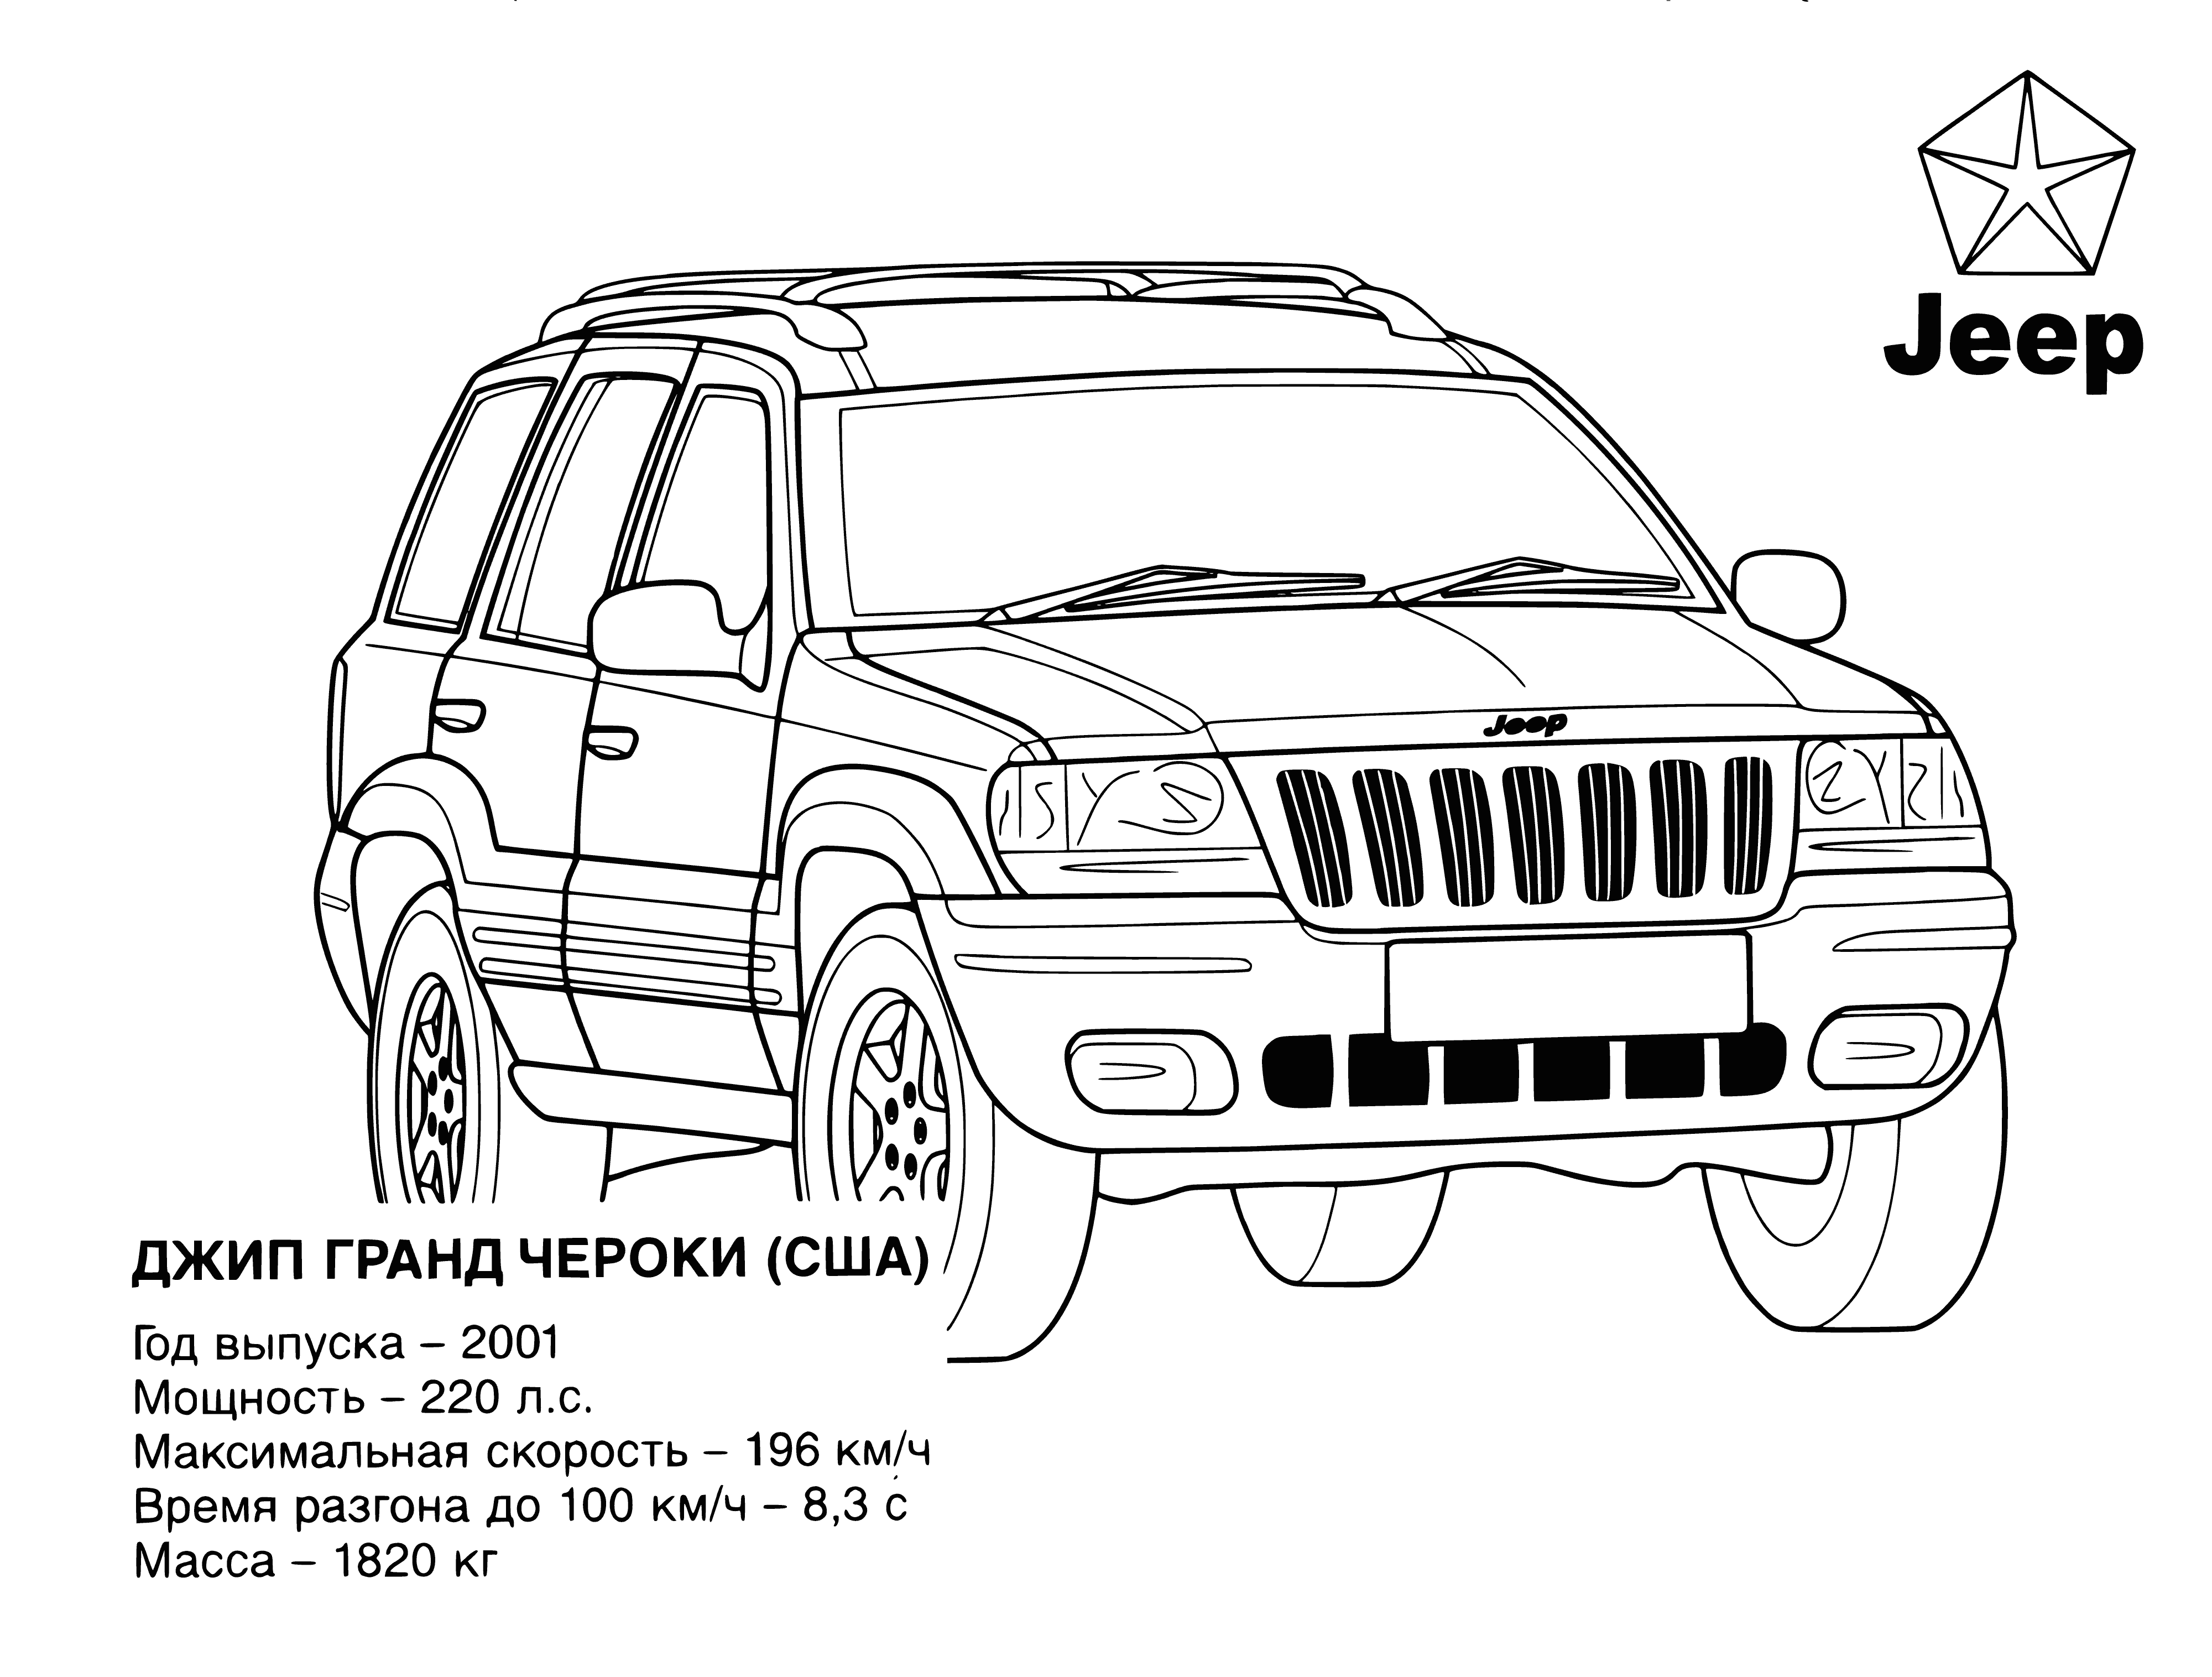 coloring page: The Jeep Grand Cherokee is a rugged and stylish large SUV with a luxurious interior and plenty of room for passengers and cargo. Available in a variety of colors.